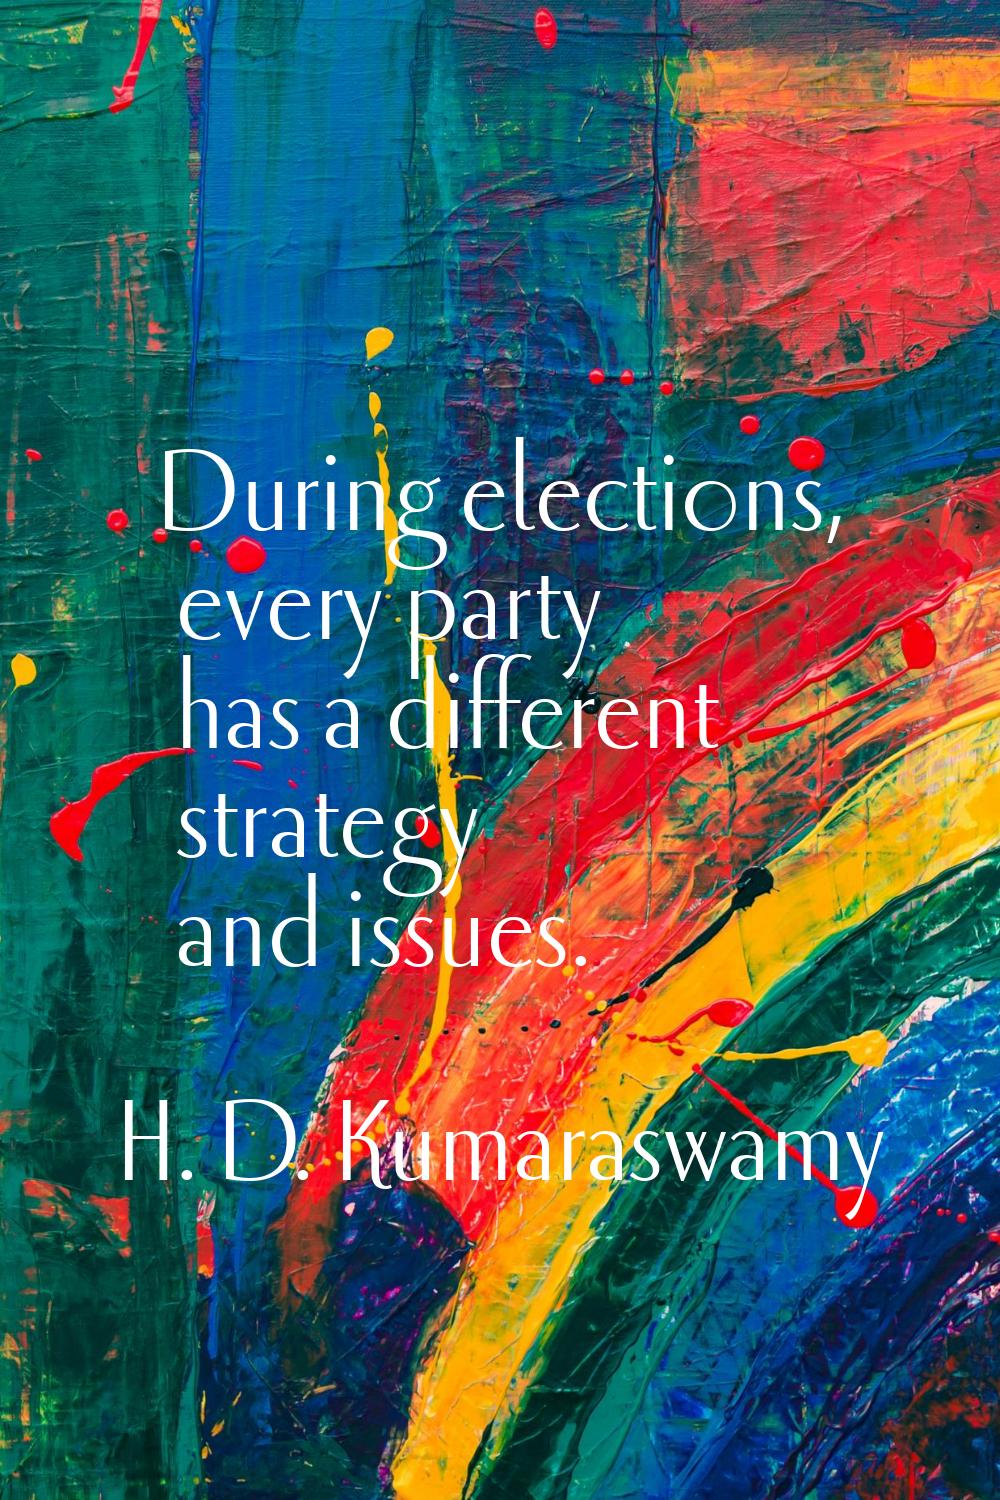 During elections, every party has a different strategy and issues.